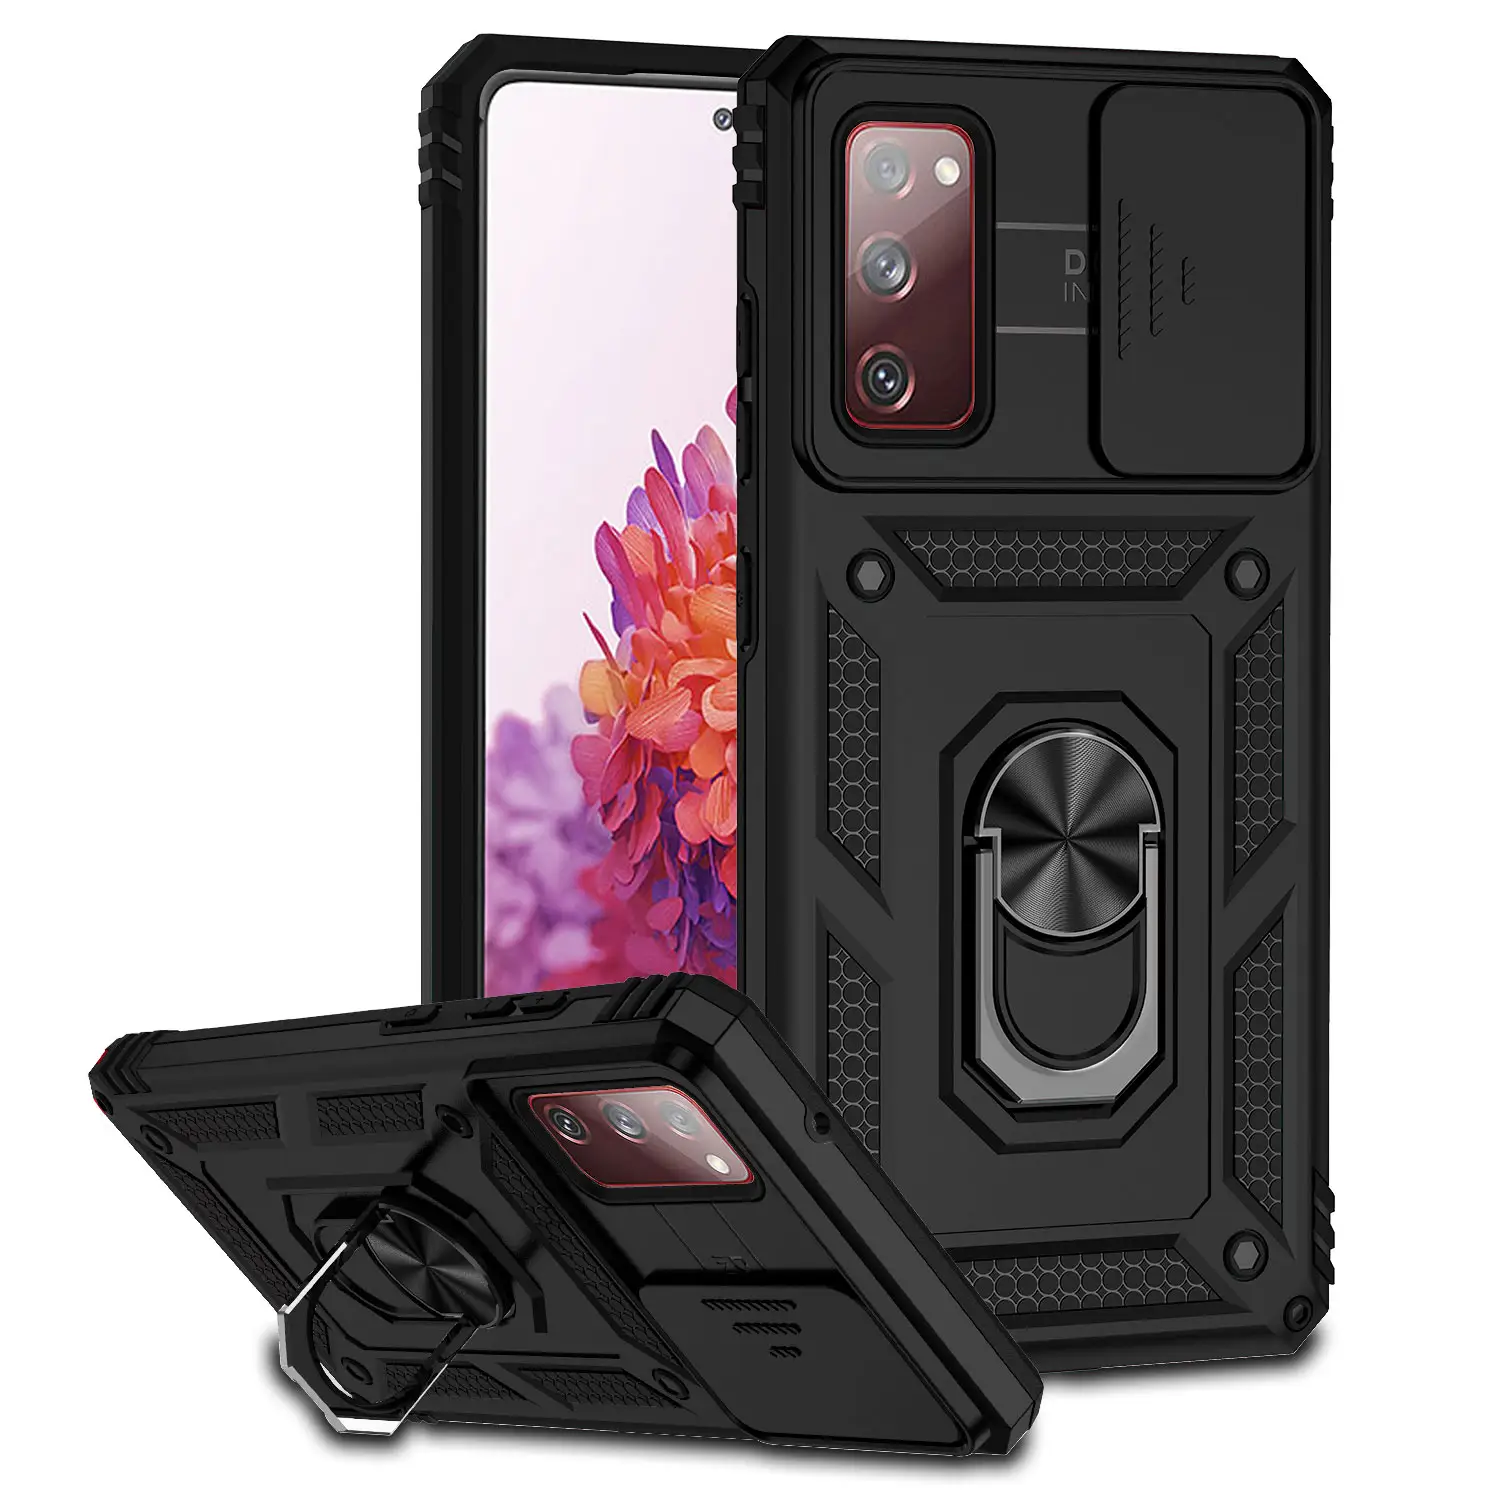 Leyi hard TPU PC back cover cases lens protection with ring kickstand phone case for Samsung Galaxy A32 5G